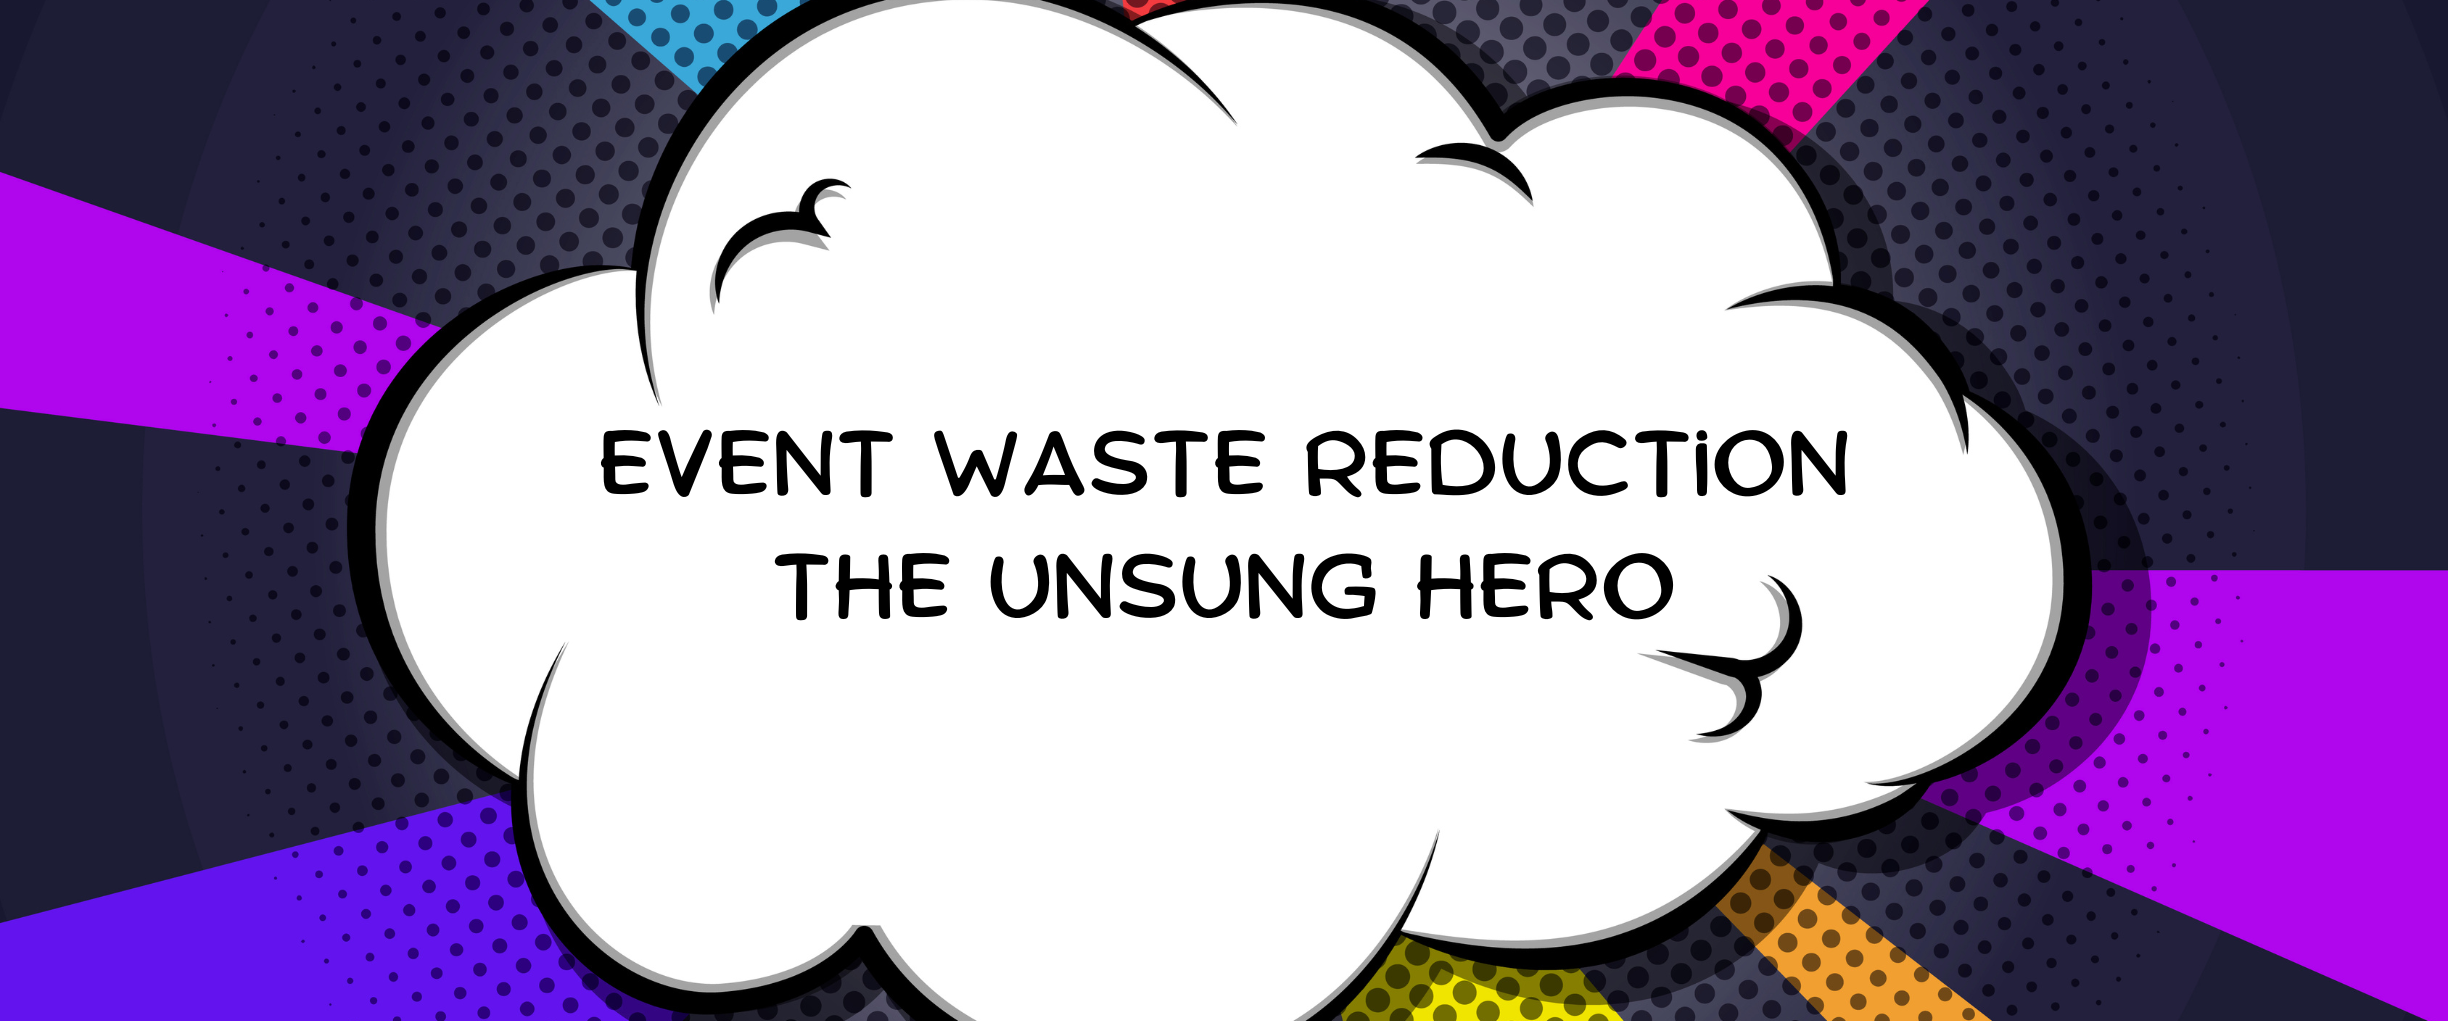 Event Waste Reduction the Unsung Hero